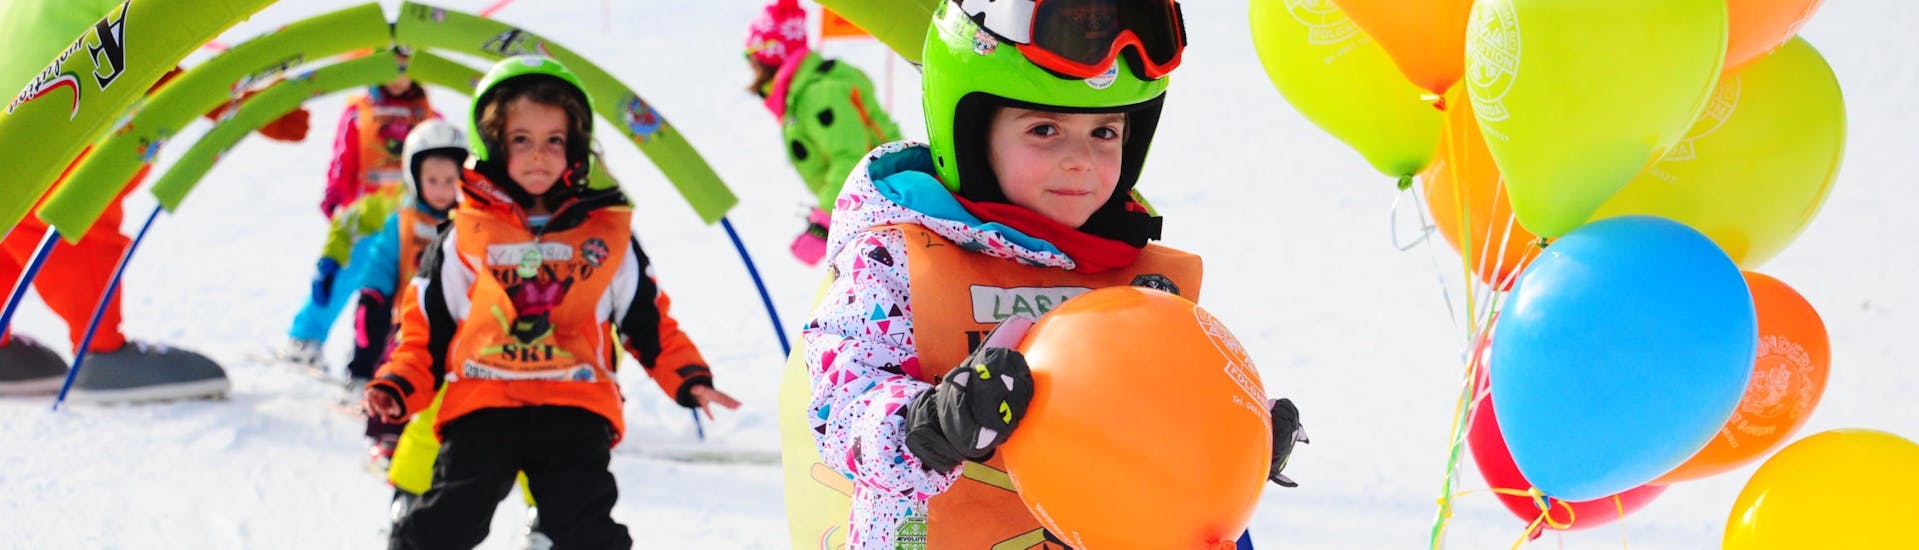 The Kids Ski Lessons (4-13 years) - All Levels of the AEvolution Folgarida Ski School are taking place in the school field; the child overcame the obstacles and deserved a balloon.